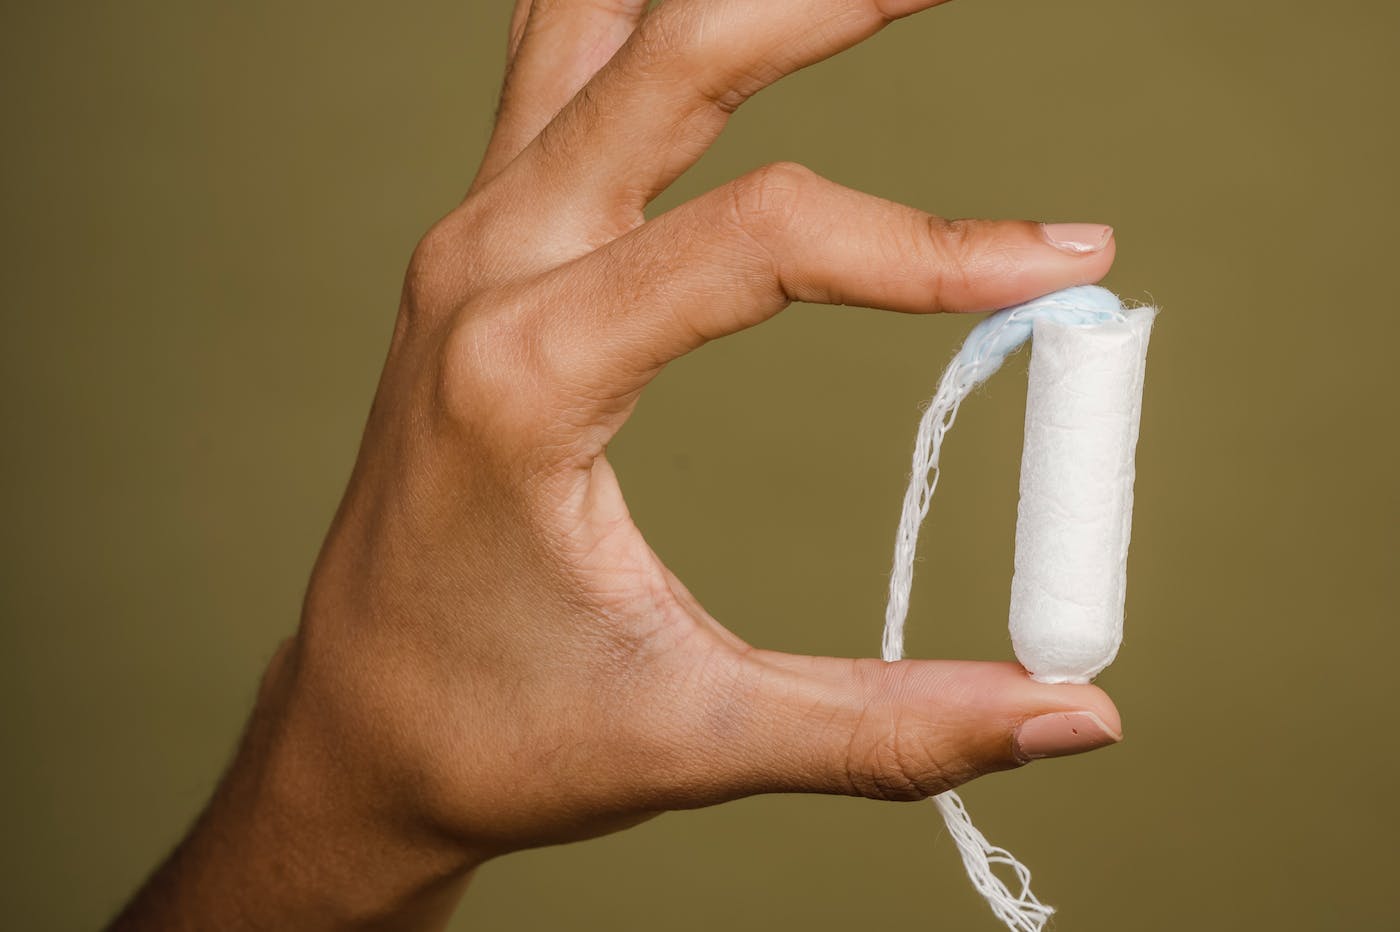 How this start-up wants to revolutionize STI screening with a simple tampon